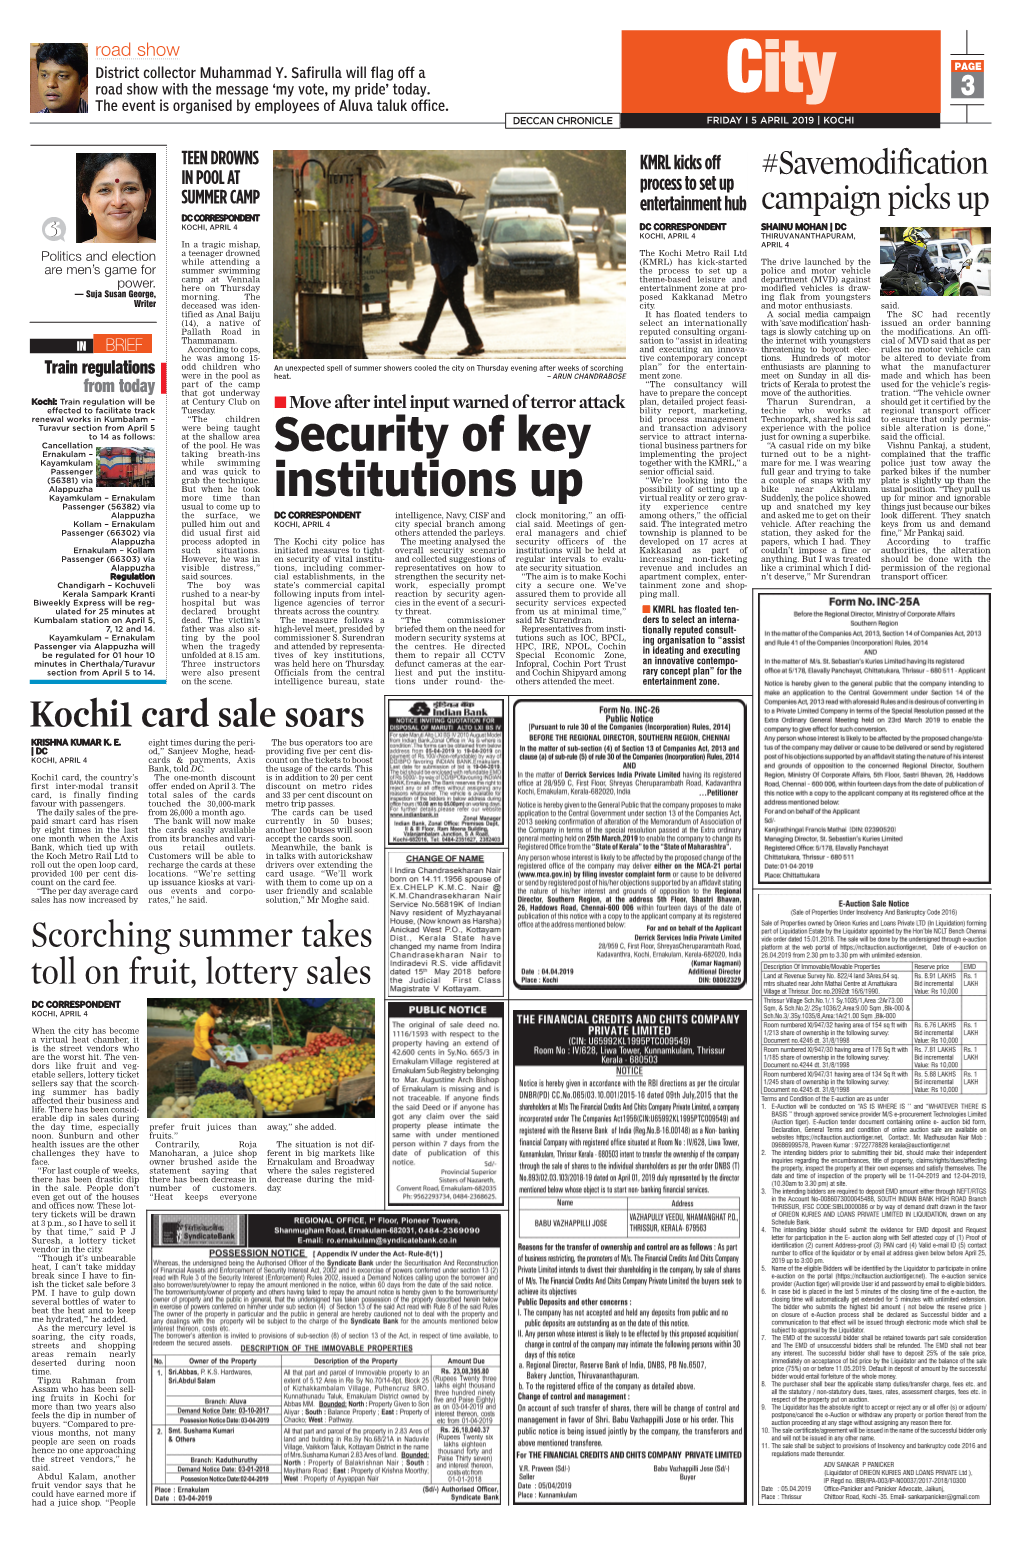 Security of Key Institutions Up